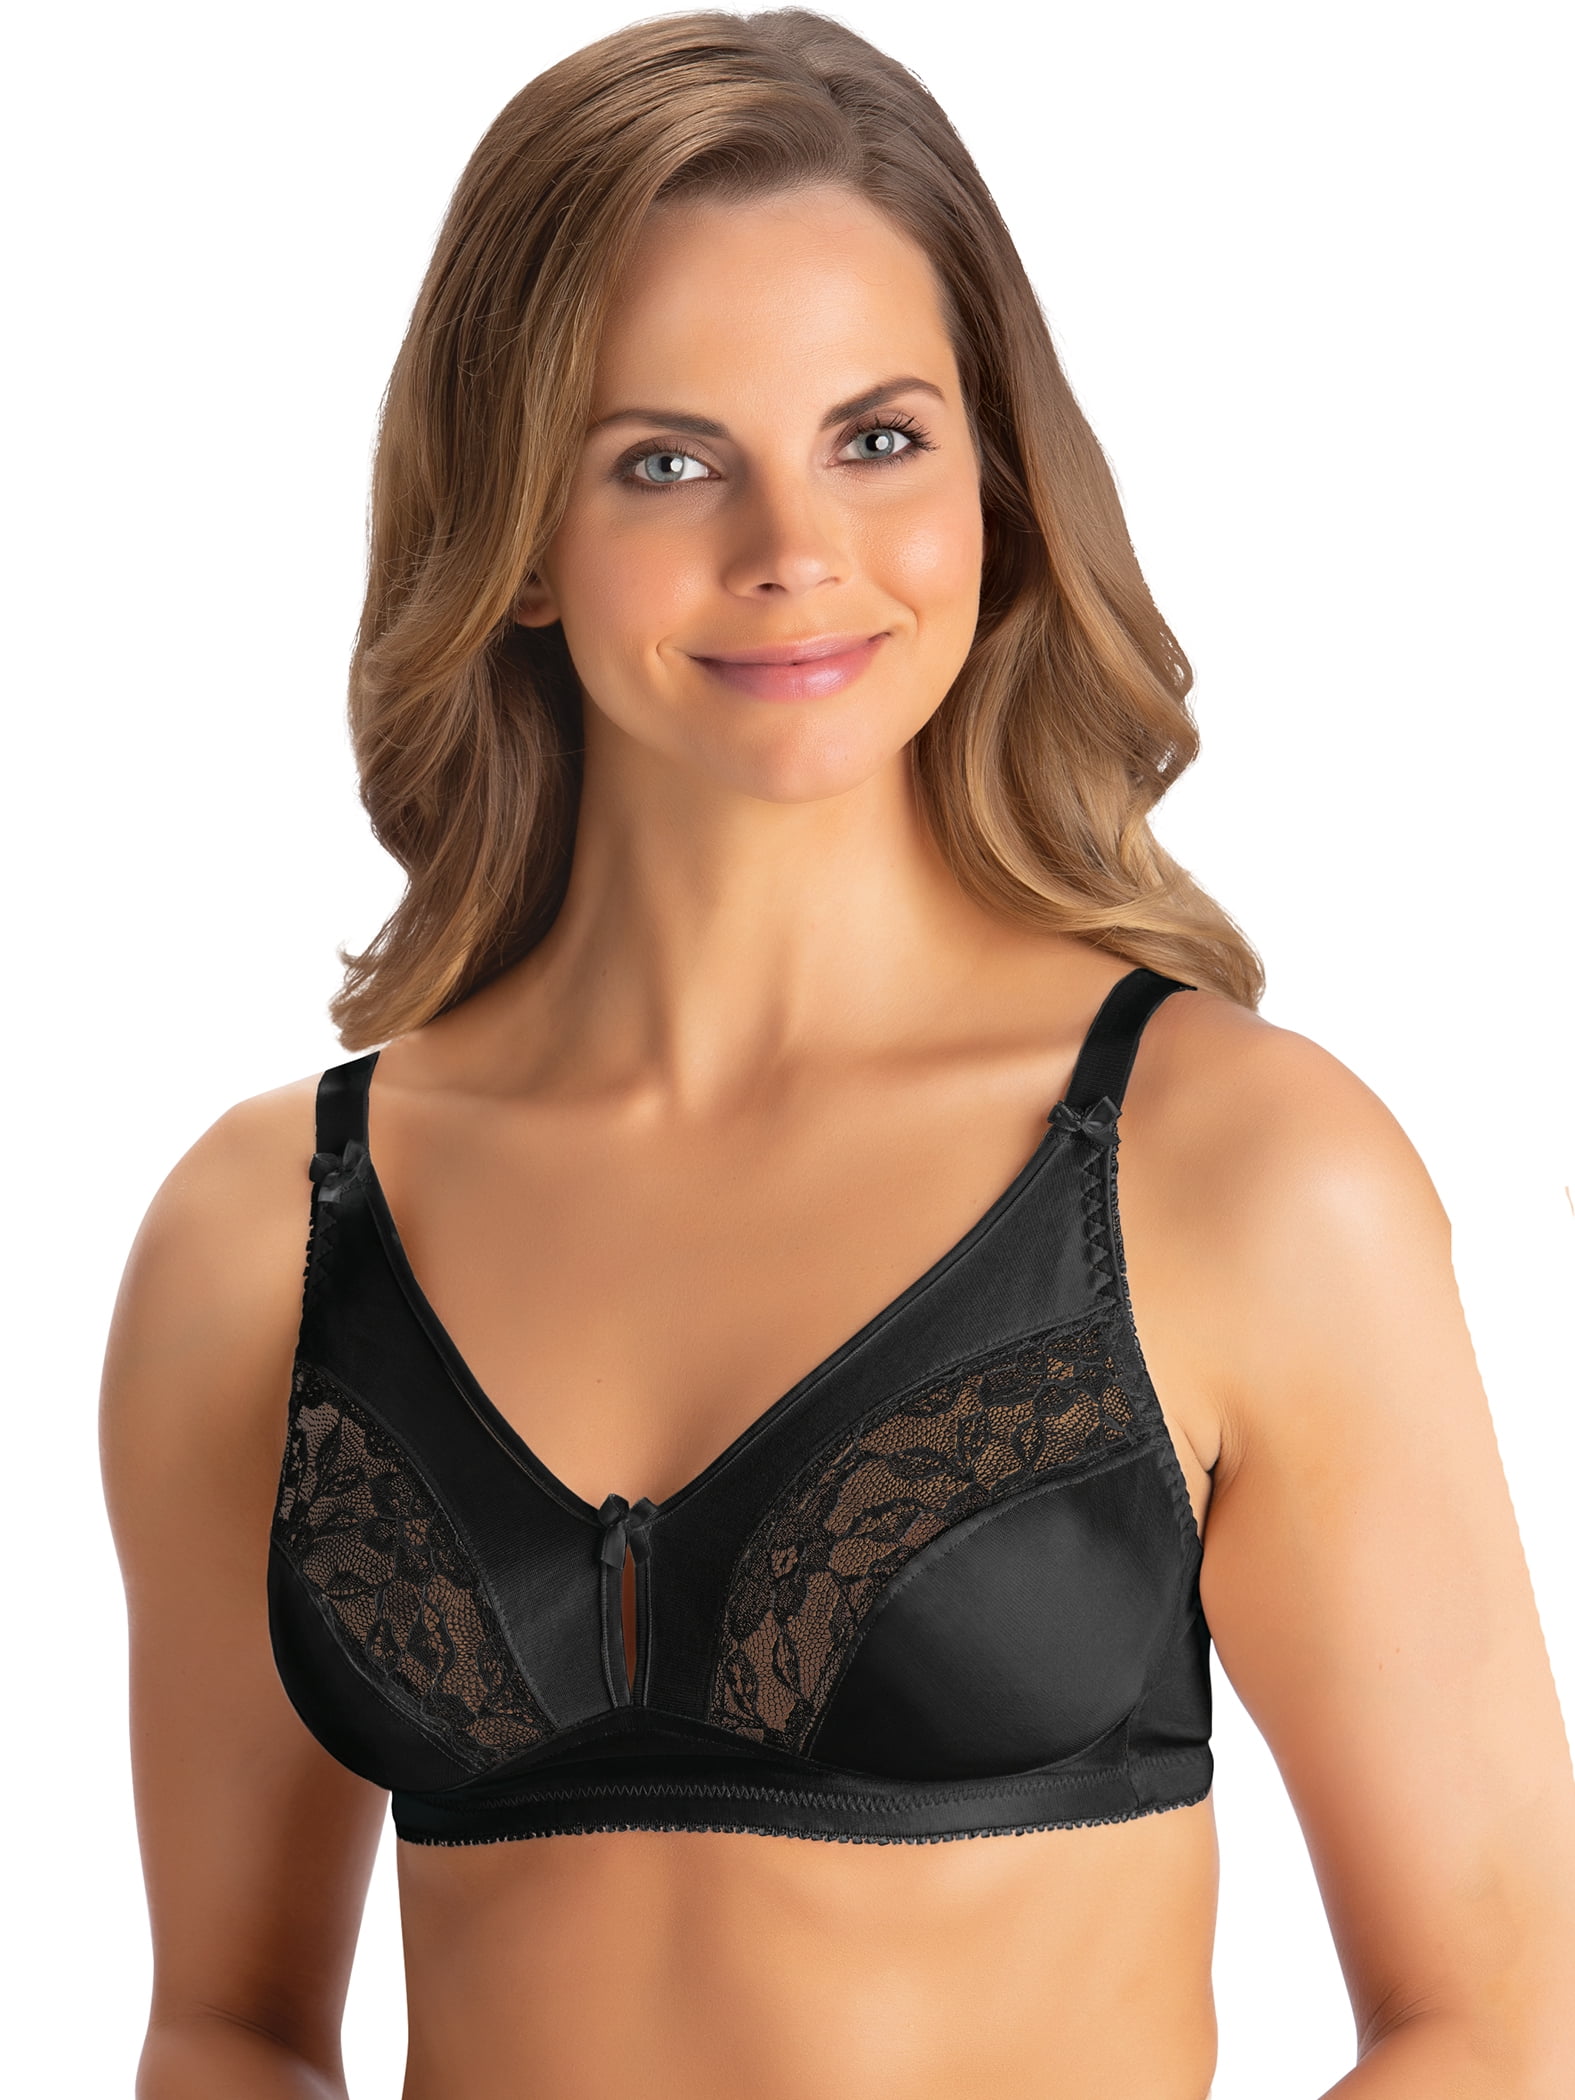 Plusform Instant Shaping Seamless Leisure Bra